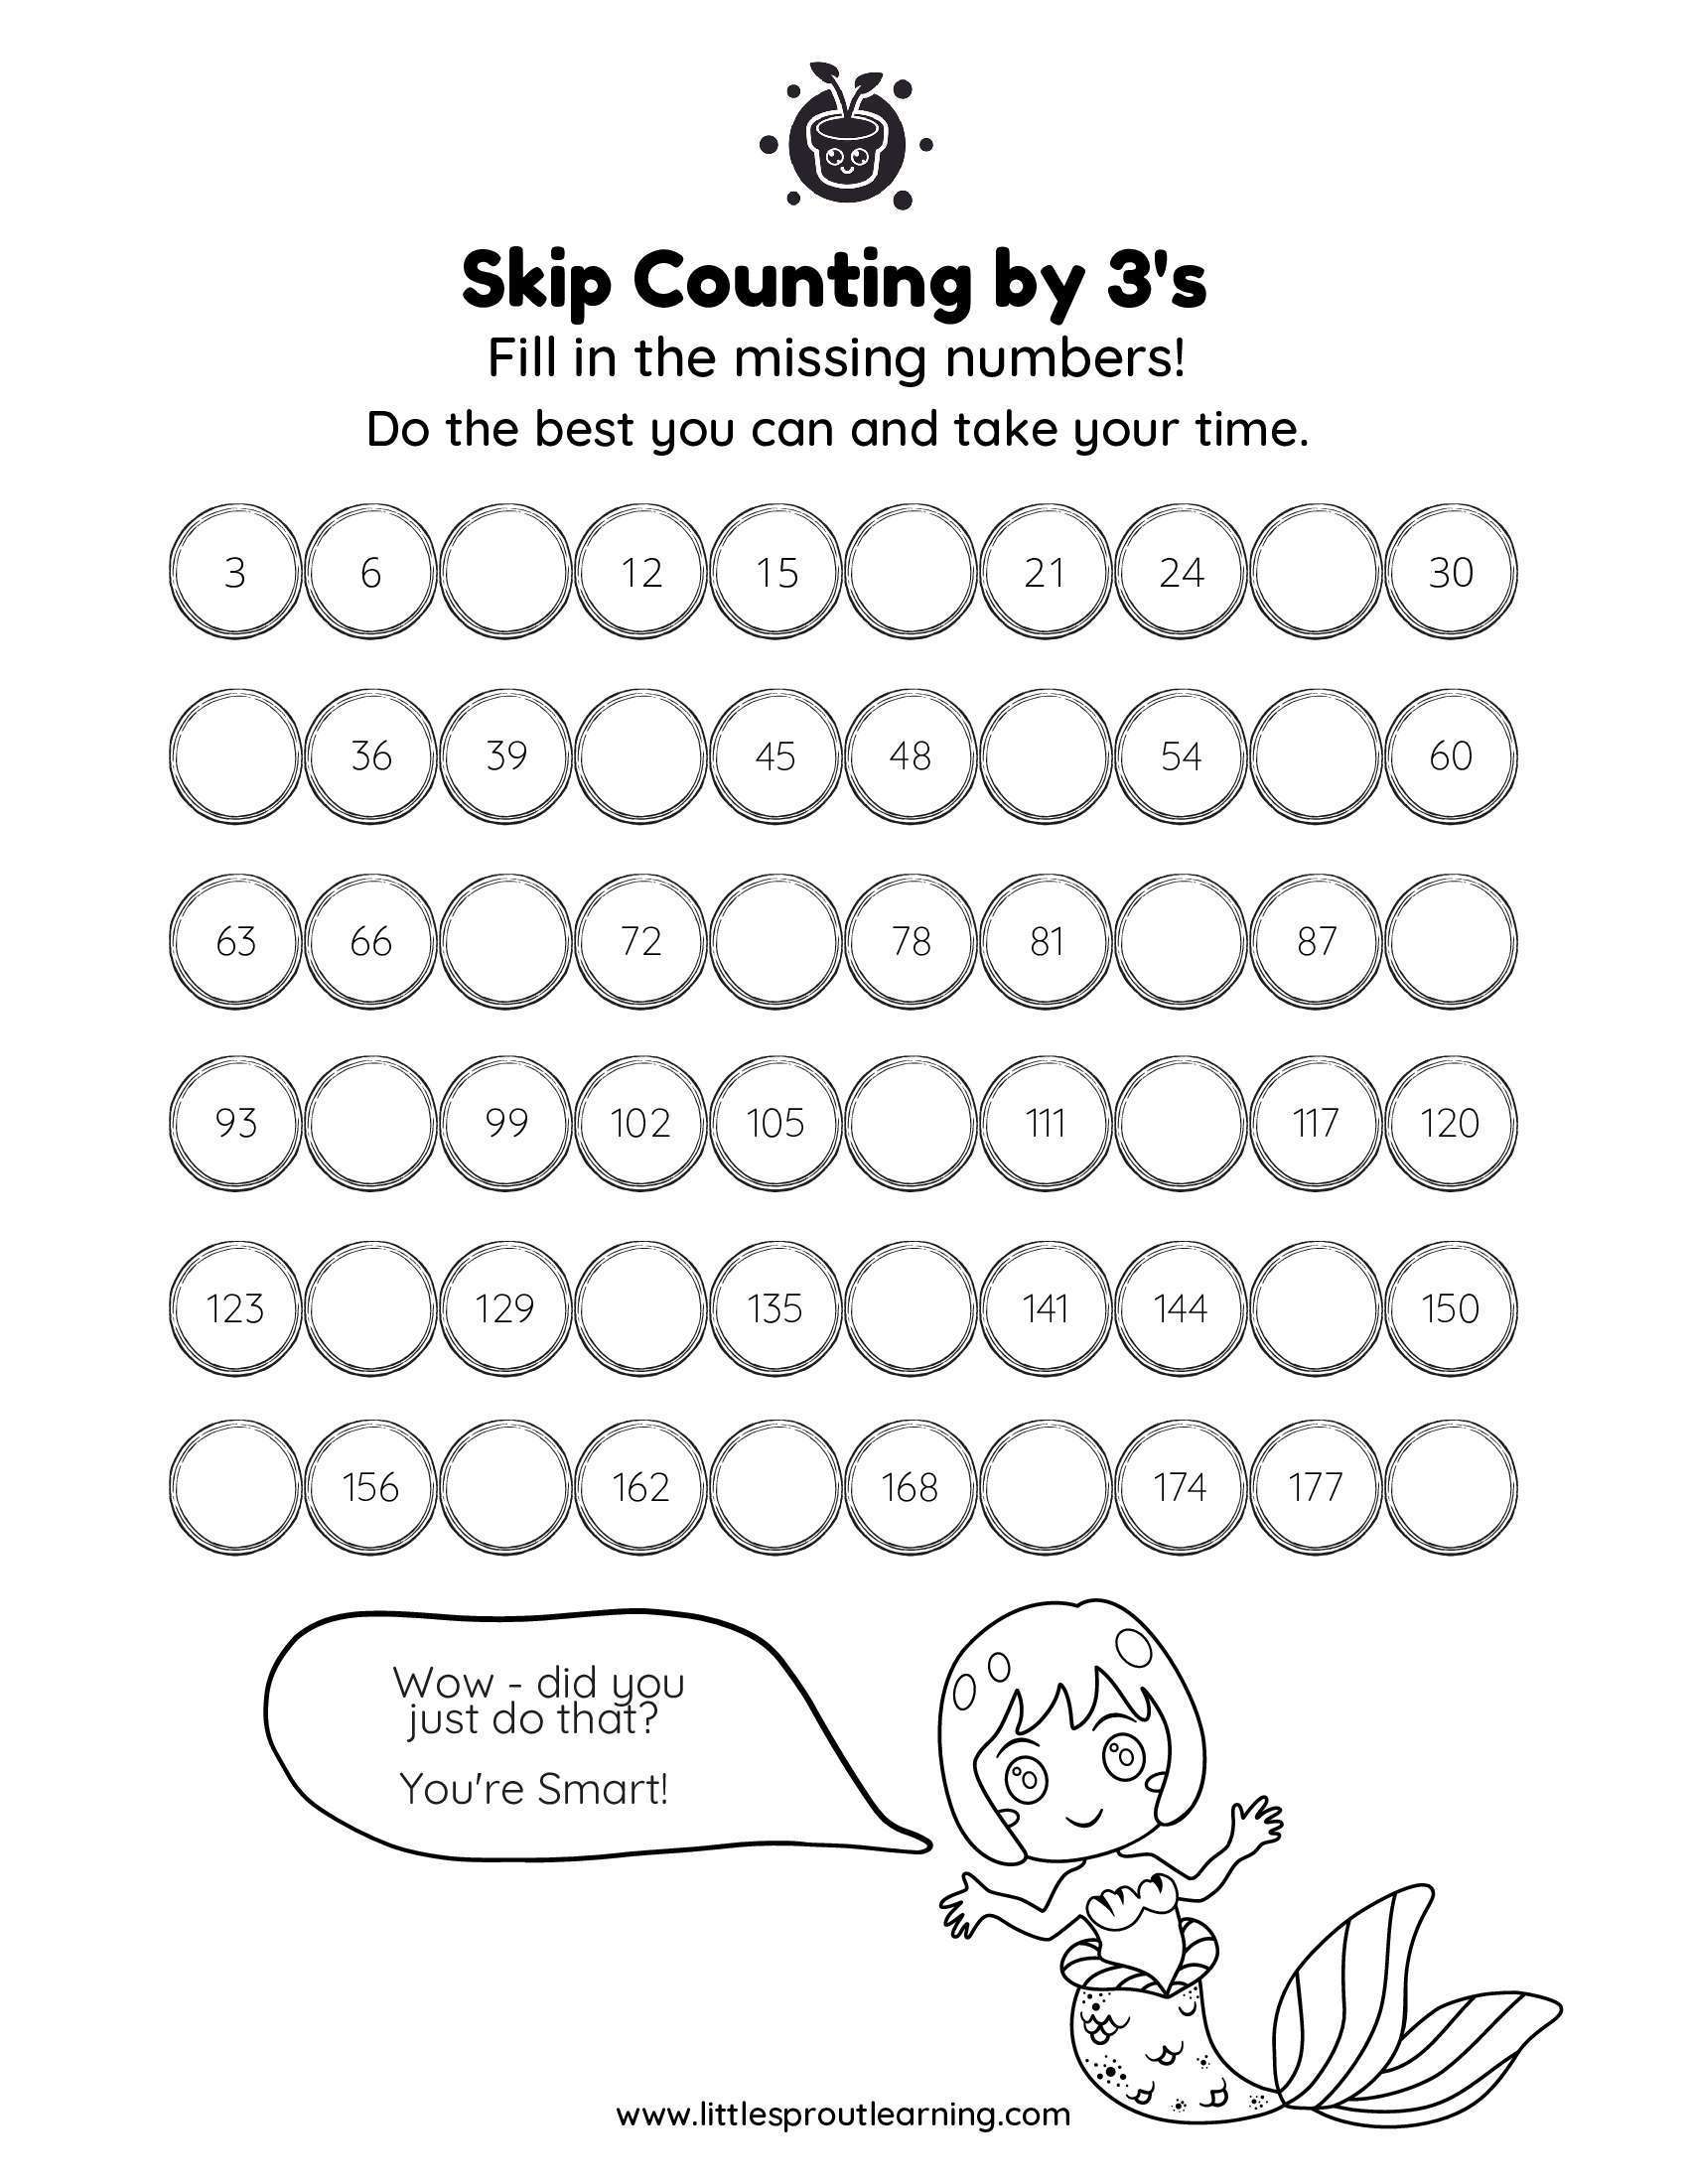 Skip Counting by 3’s